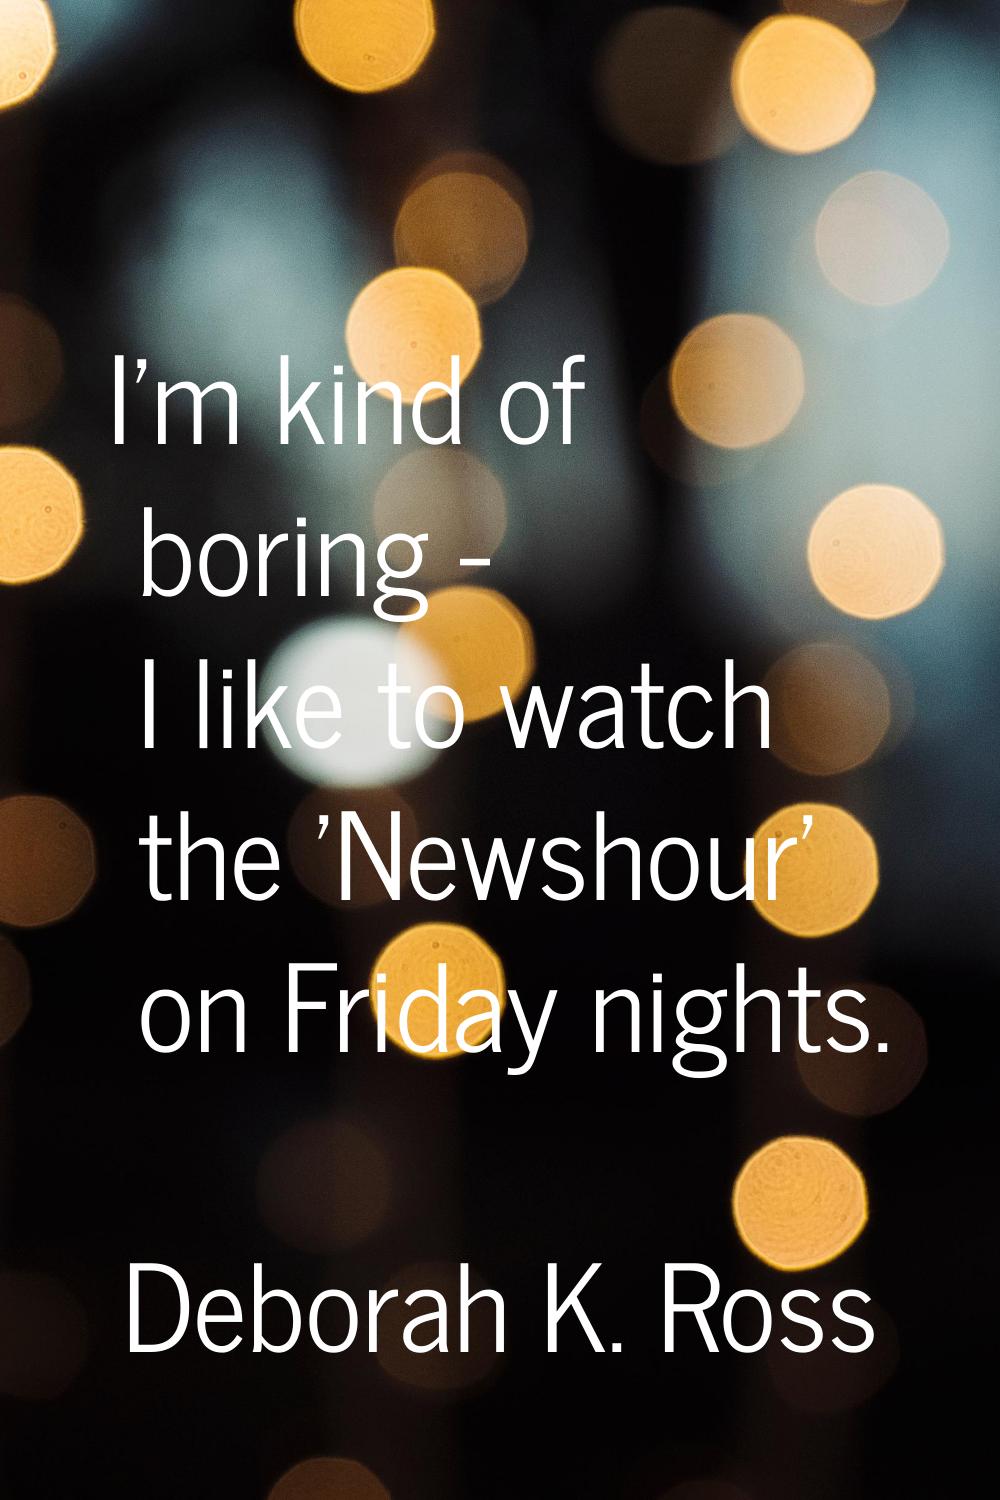 I'm kind of boring - I like to watch the 'Newshour' on Friday nights.